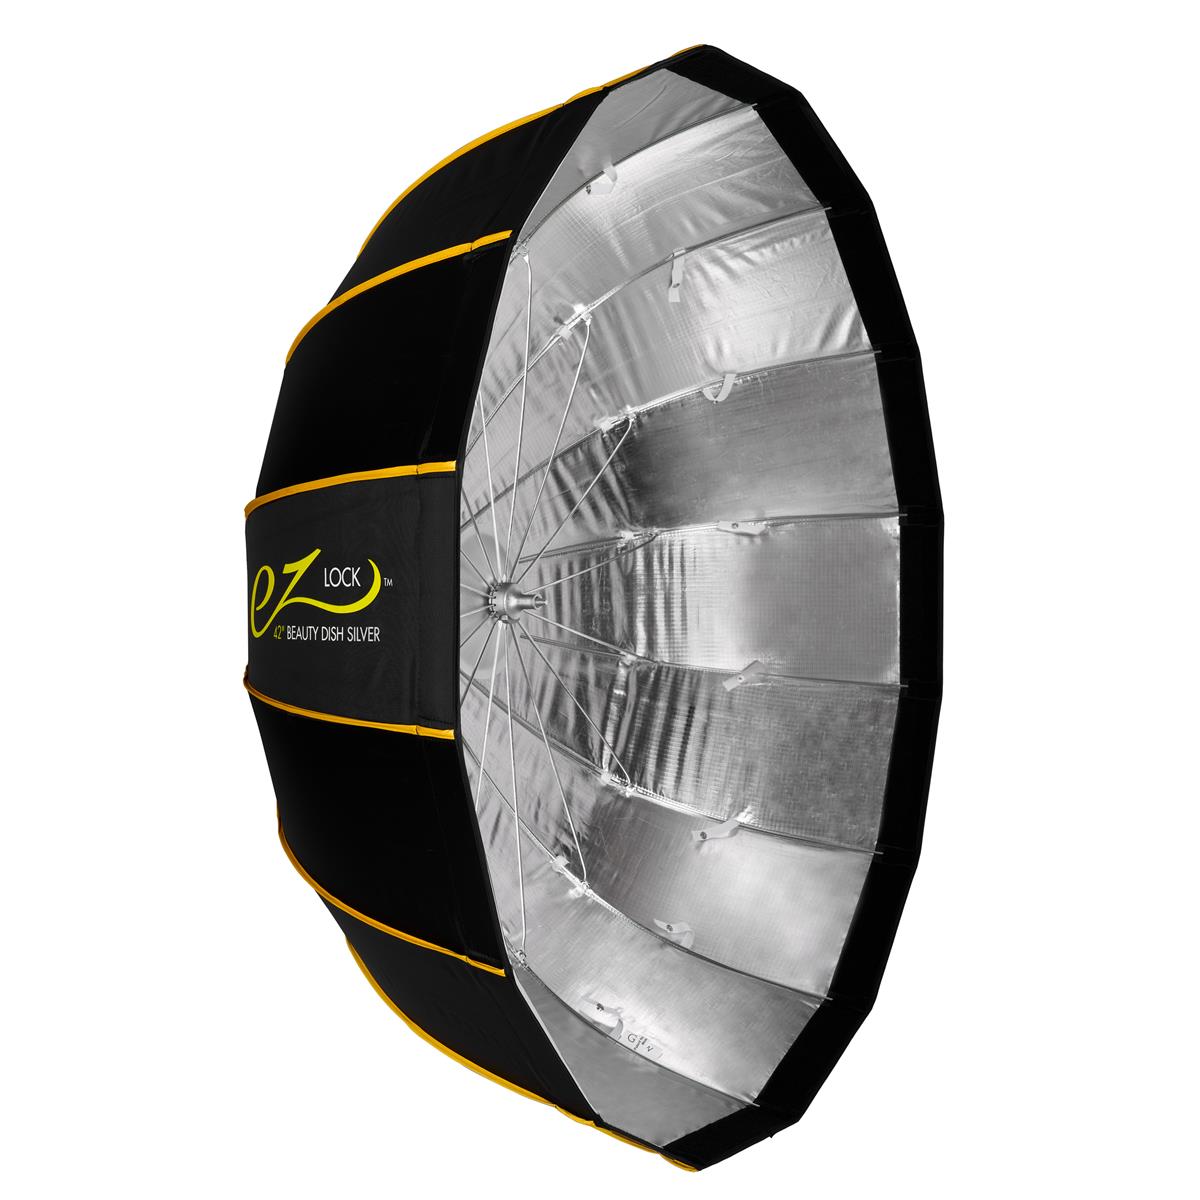 Glow EZ Lock Collapsible Silver Beauty Dish (42